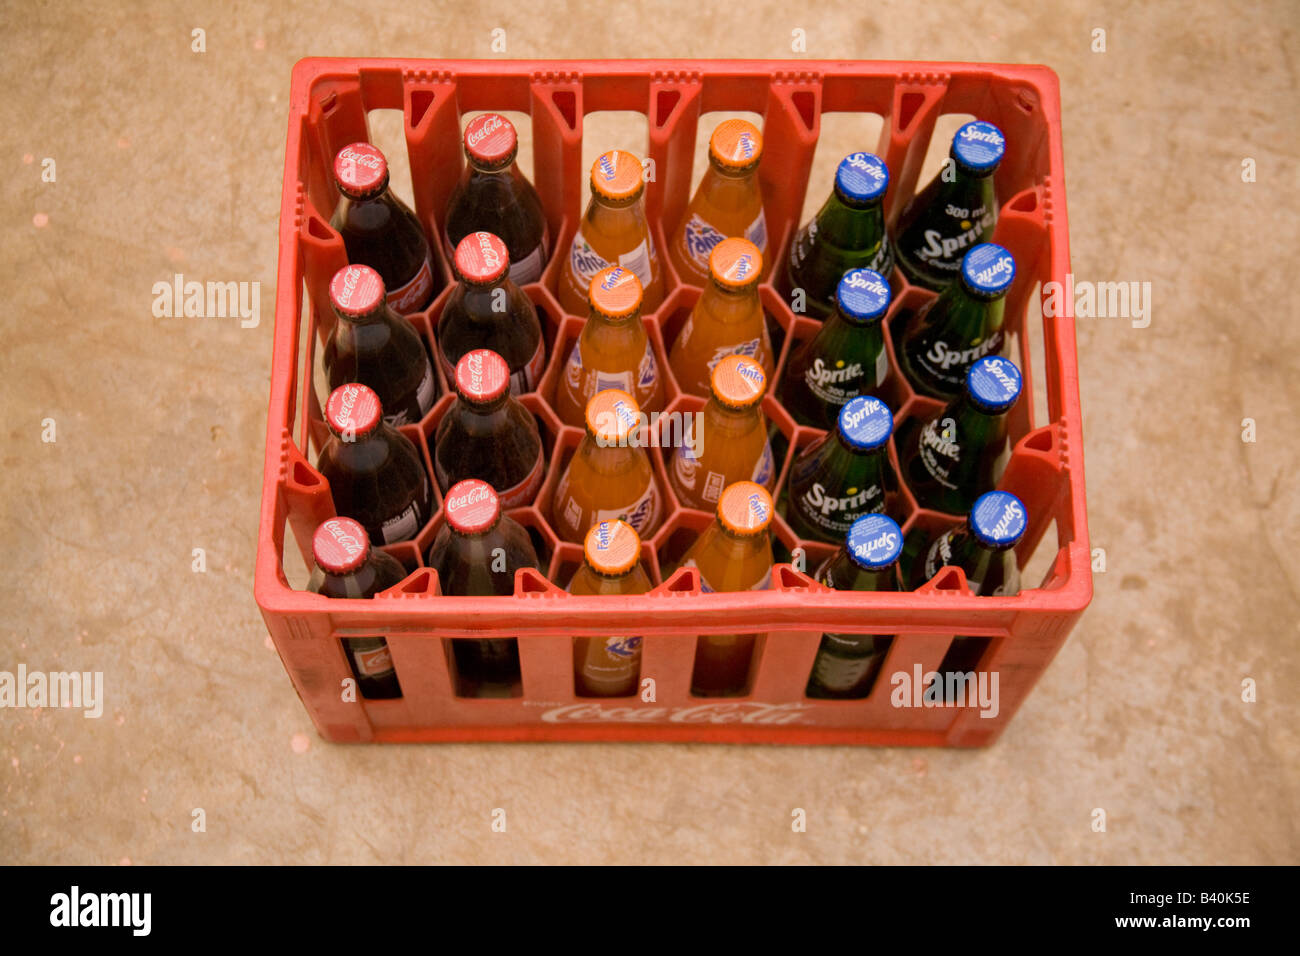 Crate of bottles of soft drinks Zambia Africa Stock Photo - Alamy